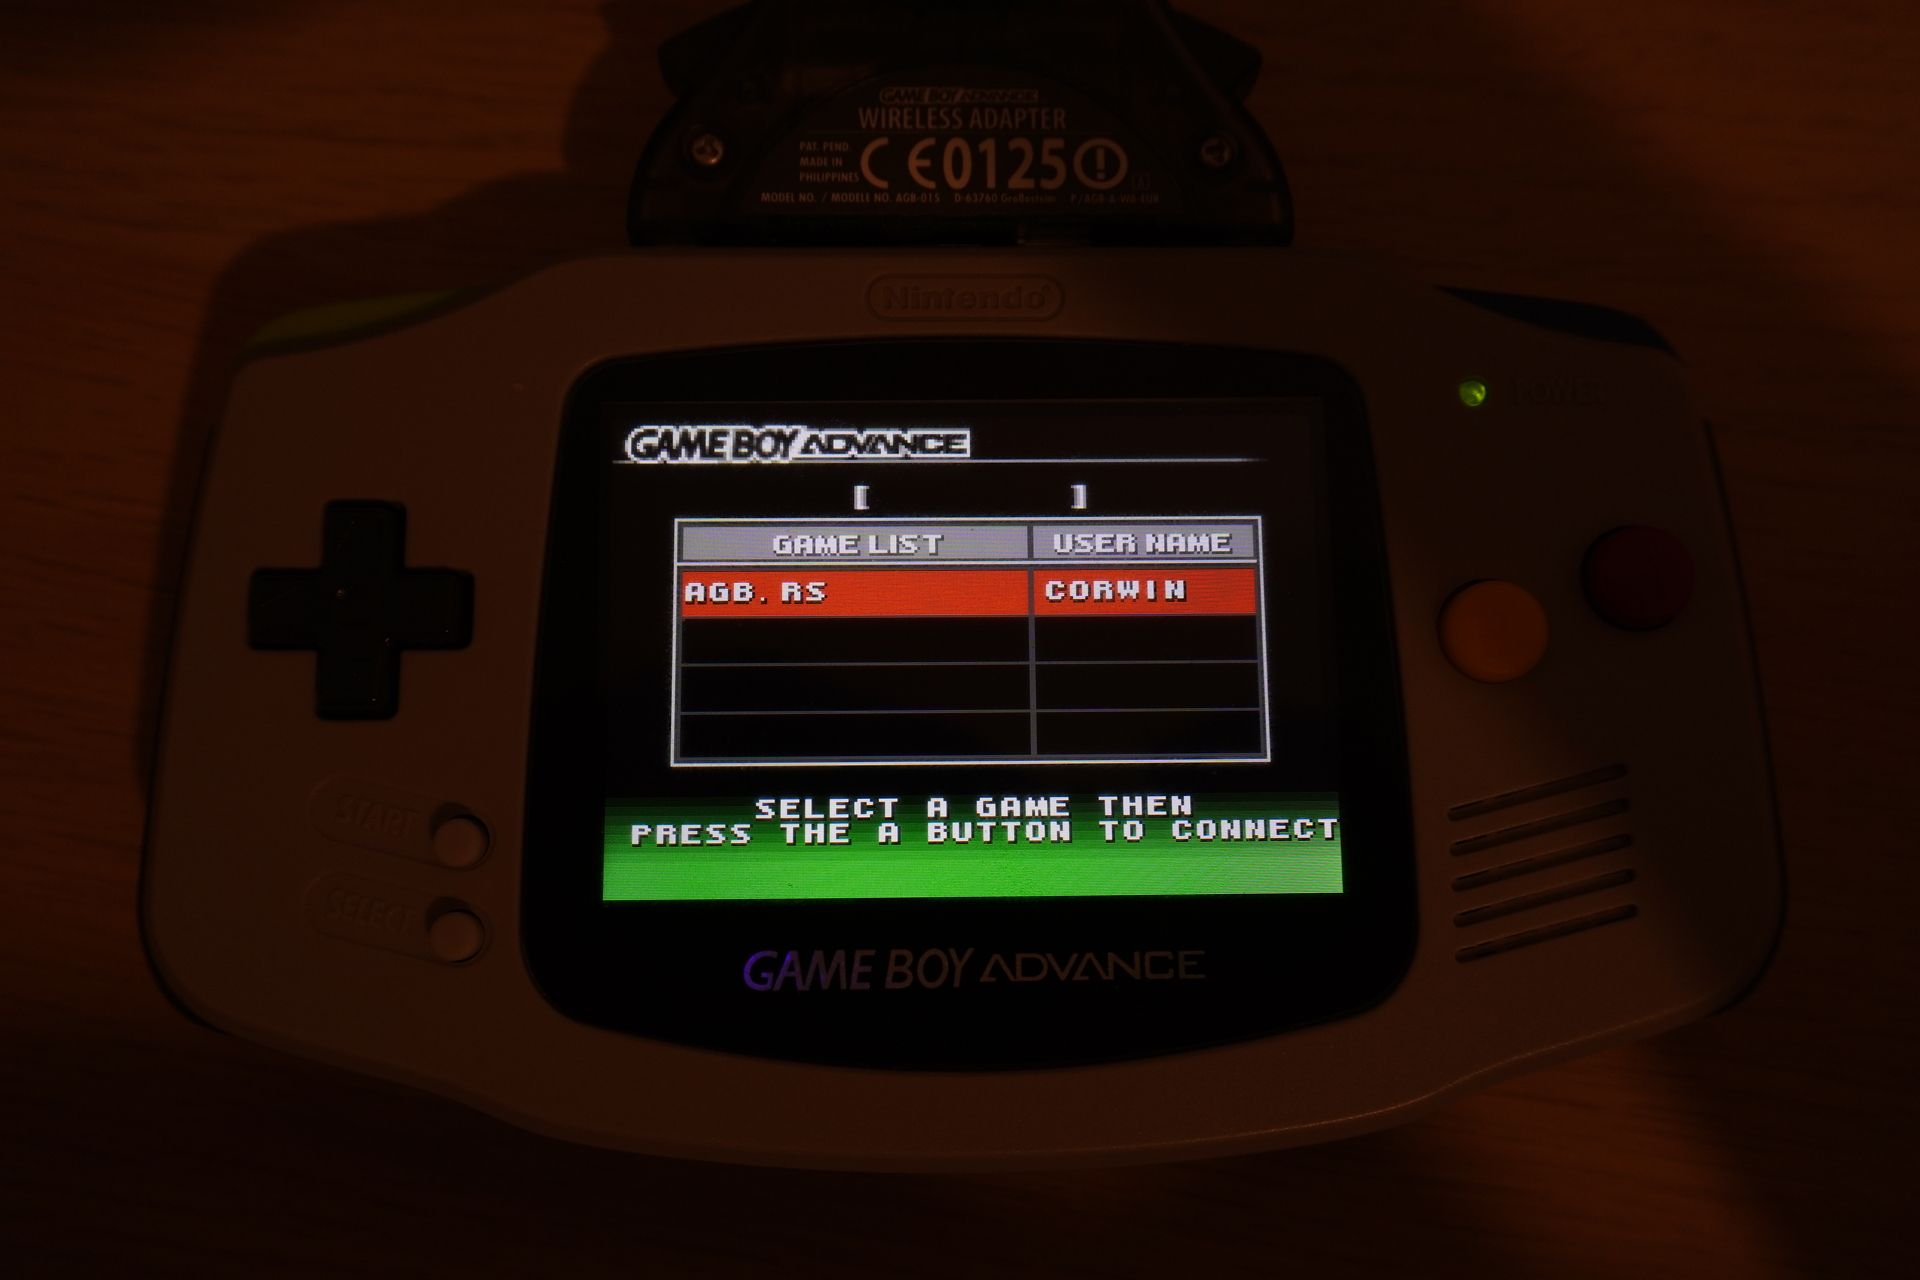 The
multiboot rom from the wireless adapter showing a game title of AGB.RS and a
username of CORWIN